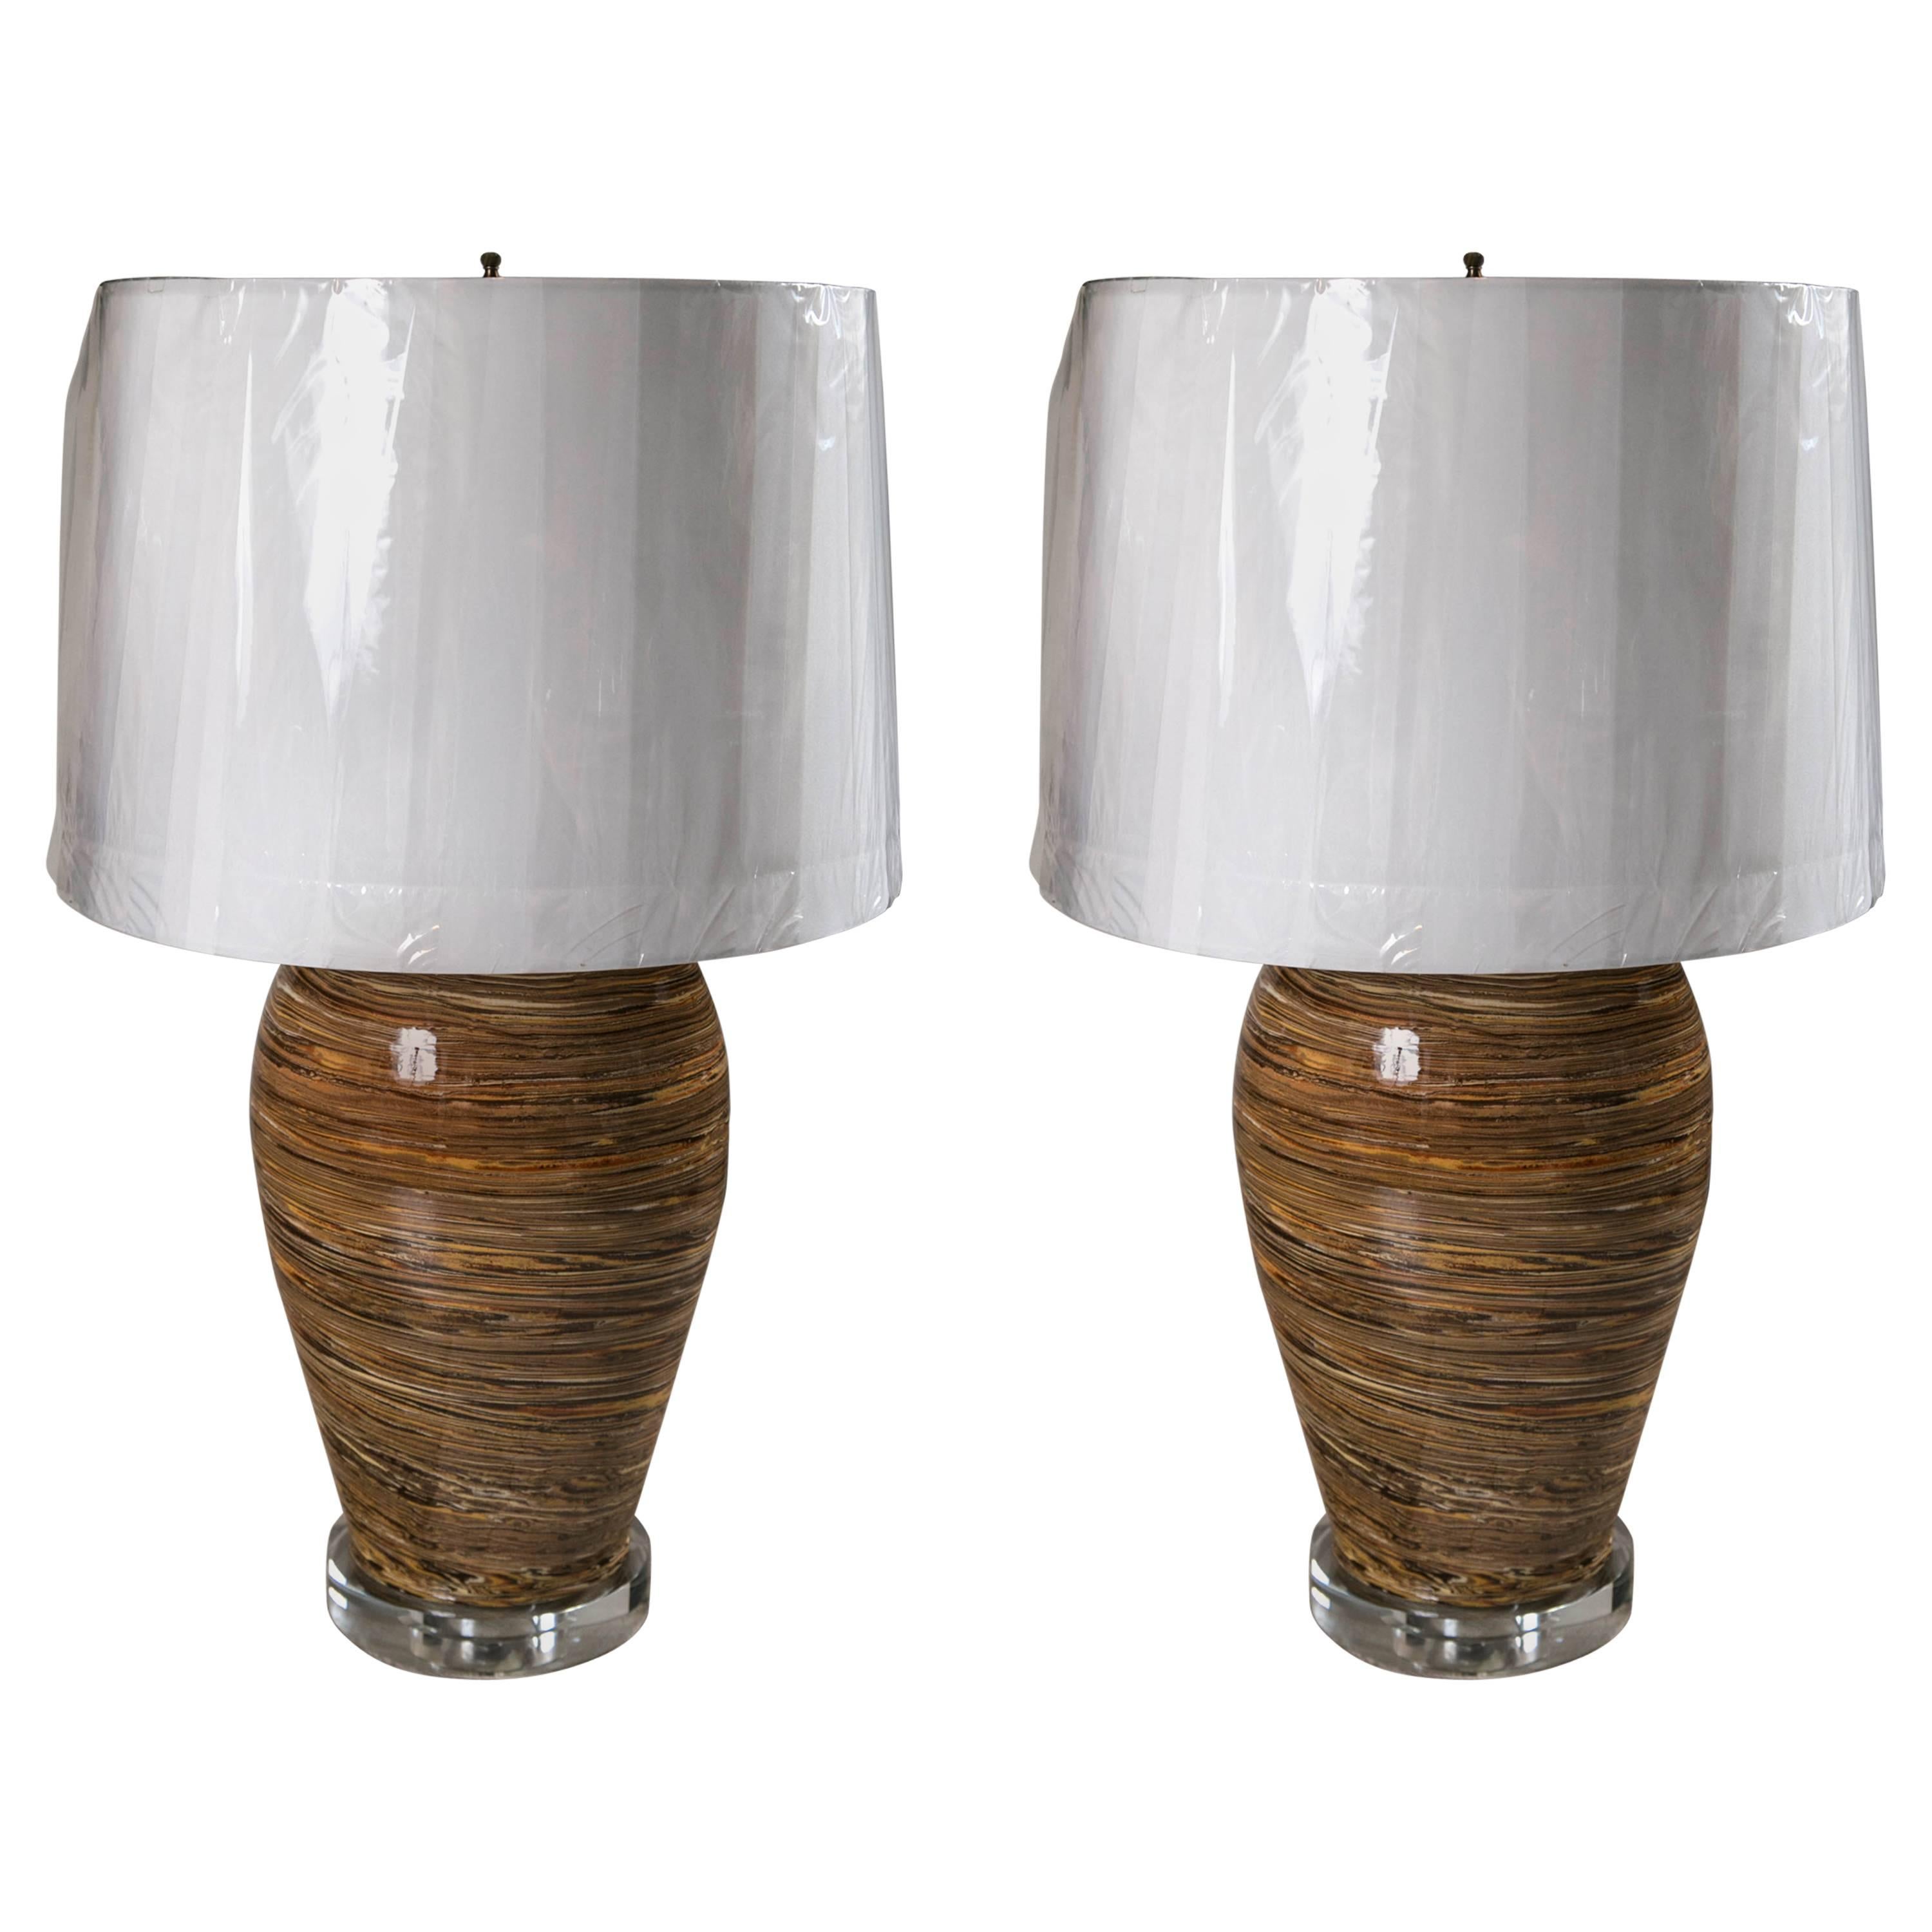 Apt Pottery Lamps For Sale